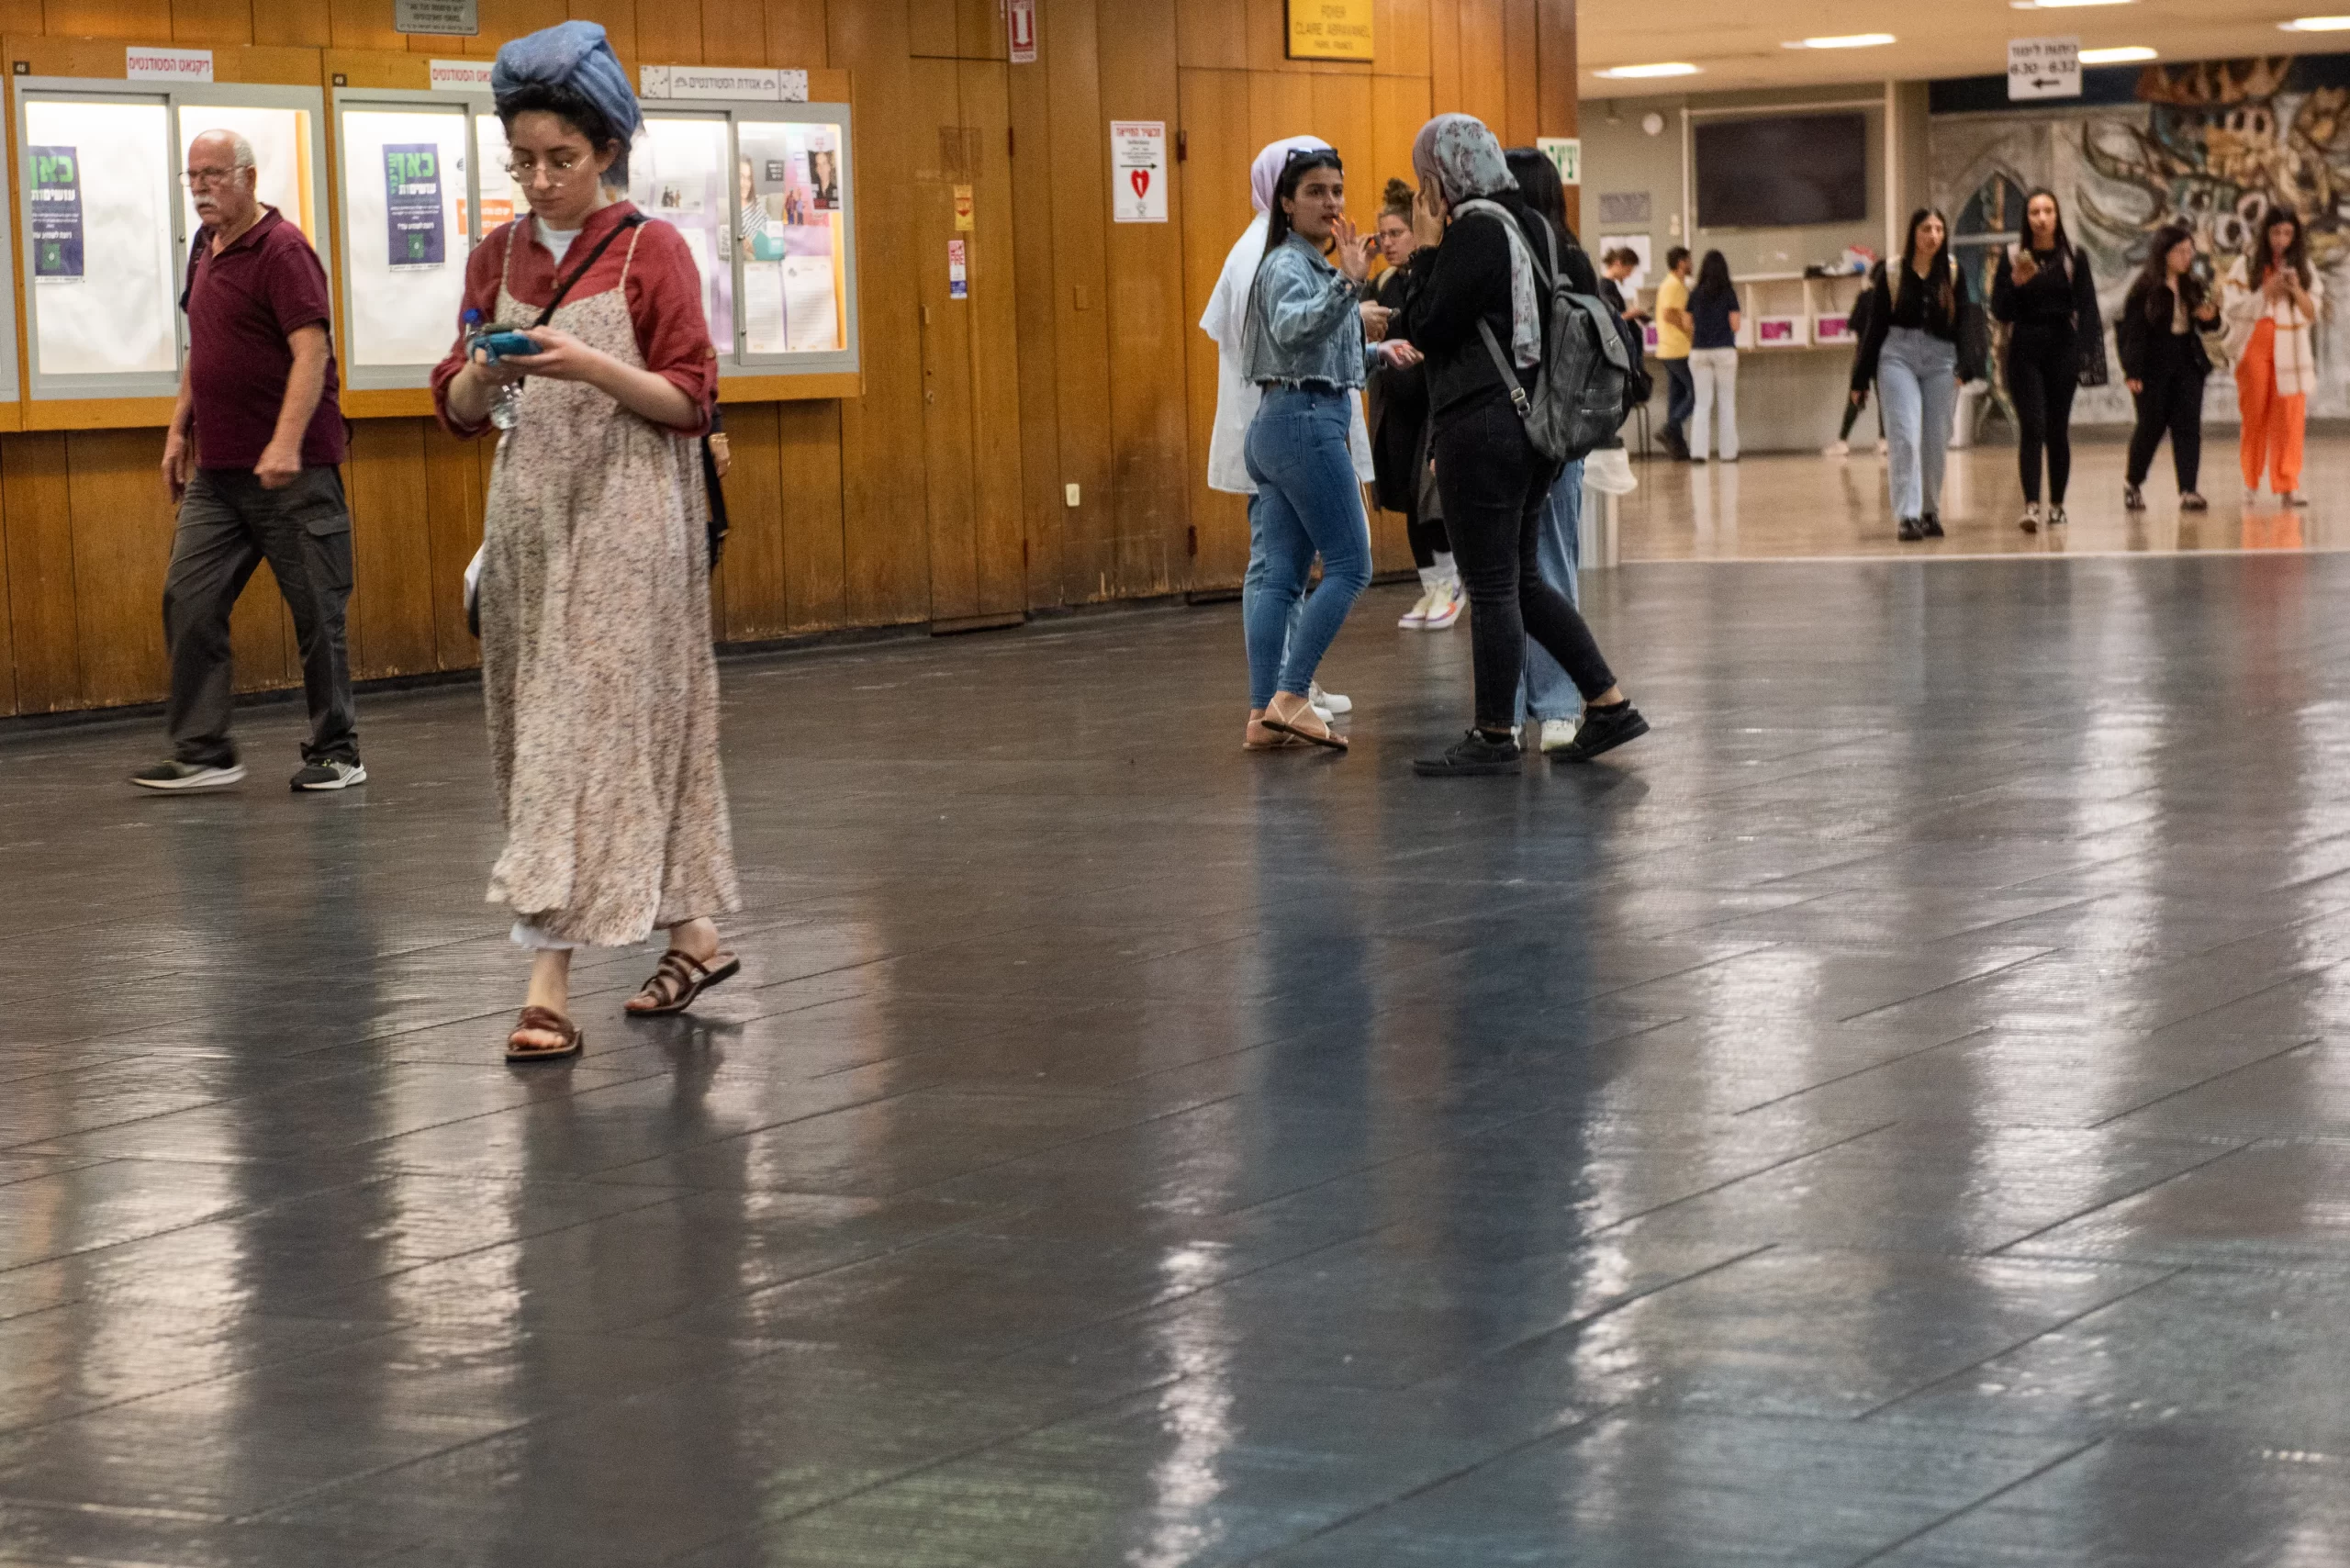 An Orthodox Jewish female student walks with Muslim students wearing headscarves visible in the background, alongside other students without specific religious attire in the corridors of the University of Haifa. In the campus classrooms, there are Jews, Muslims, Druze, and Christians comprising 15-20 different religious denominations. Credit: Marinella Bandini